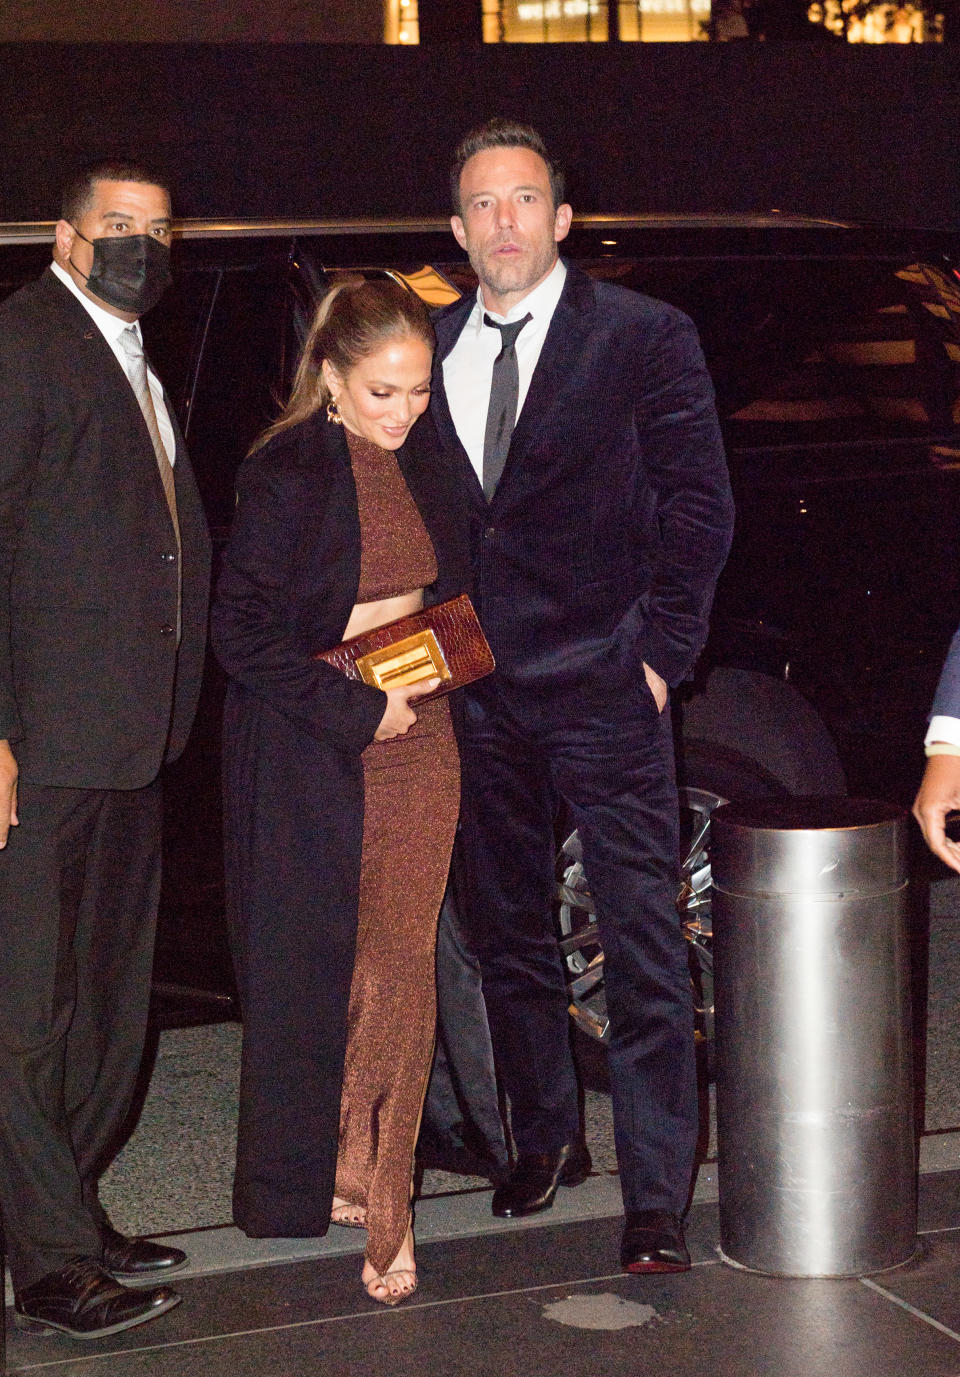 Jennifer Lopez and Ben Affleck leave the afterparty for “The Last Duel” at the Bowery Hotel in New York City. - Credit: BeautifulSignatureIG / SplashNews.com